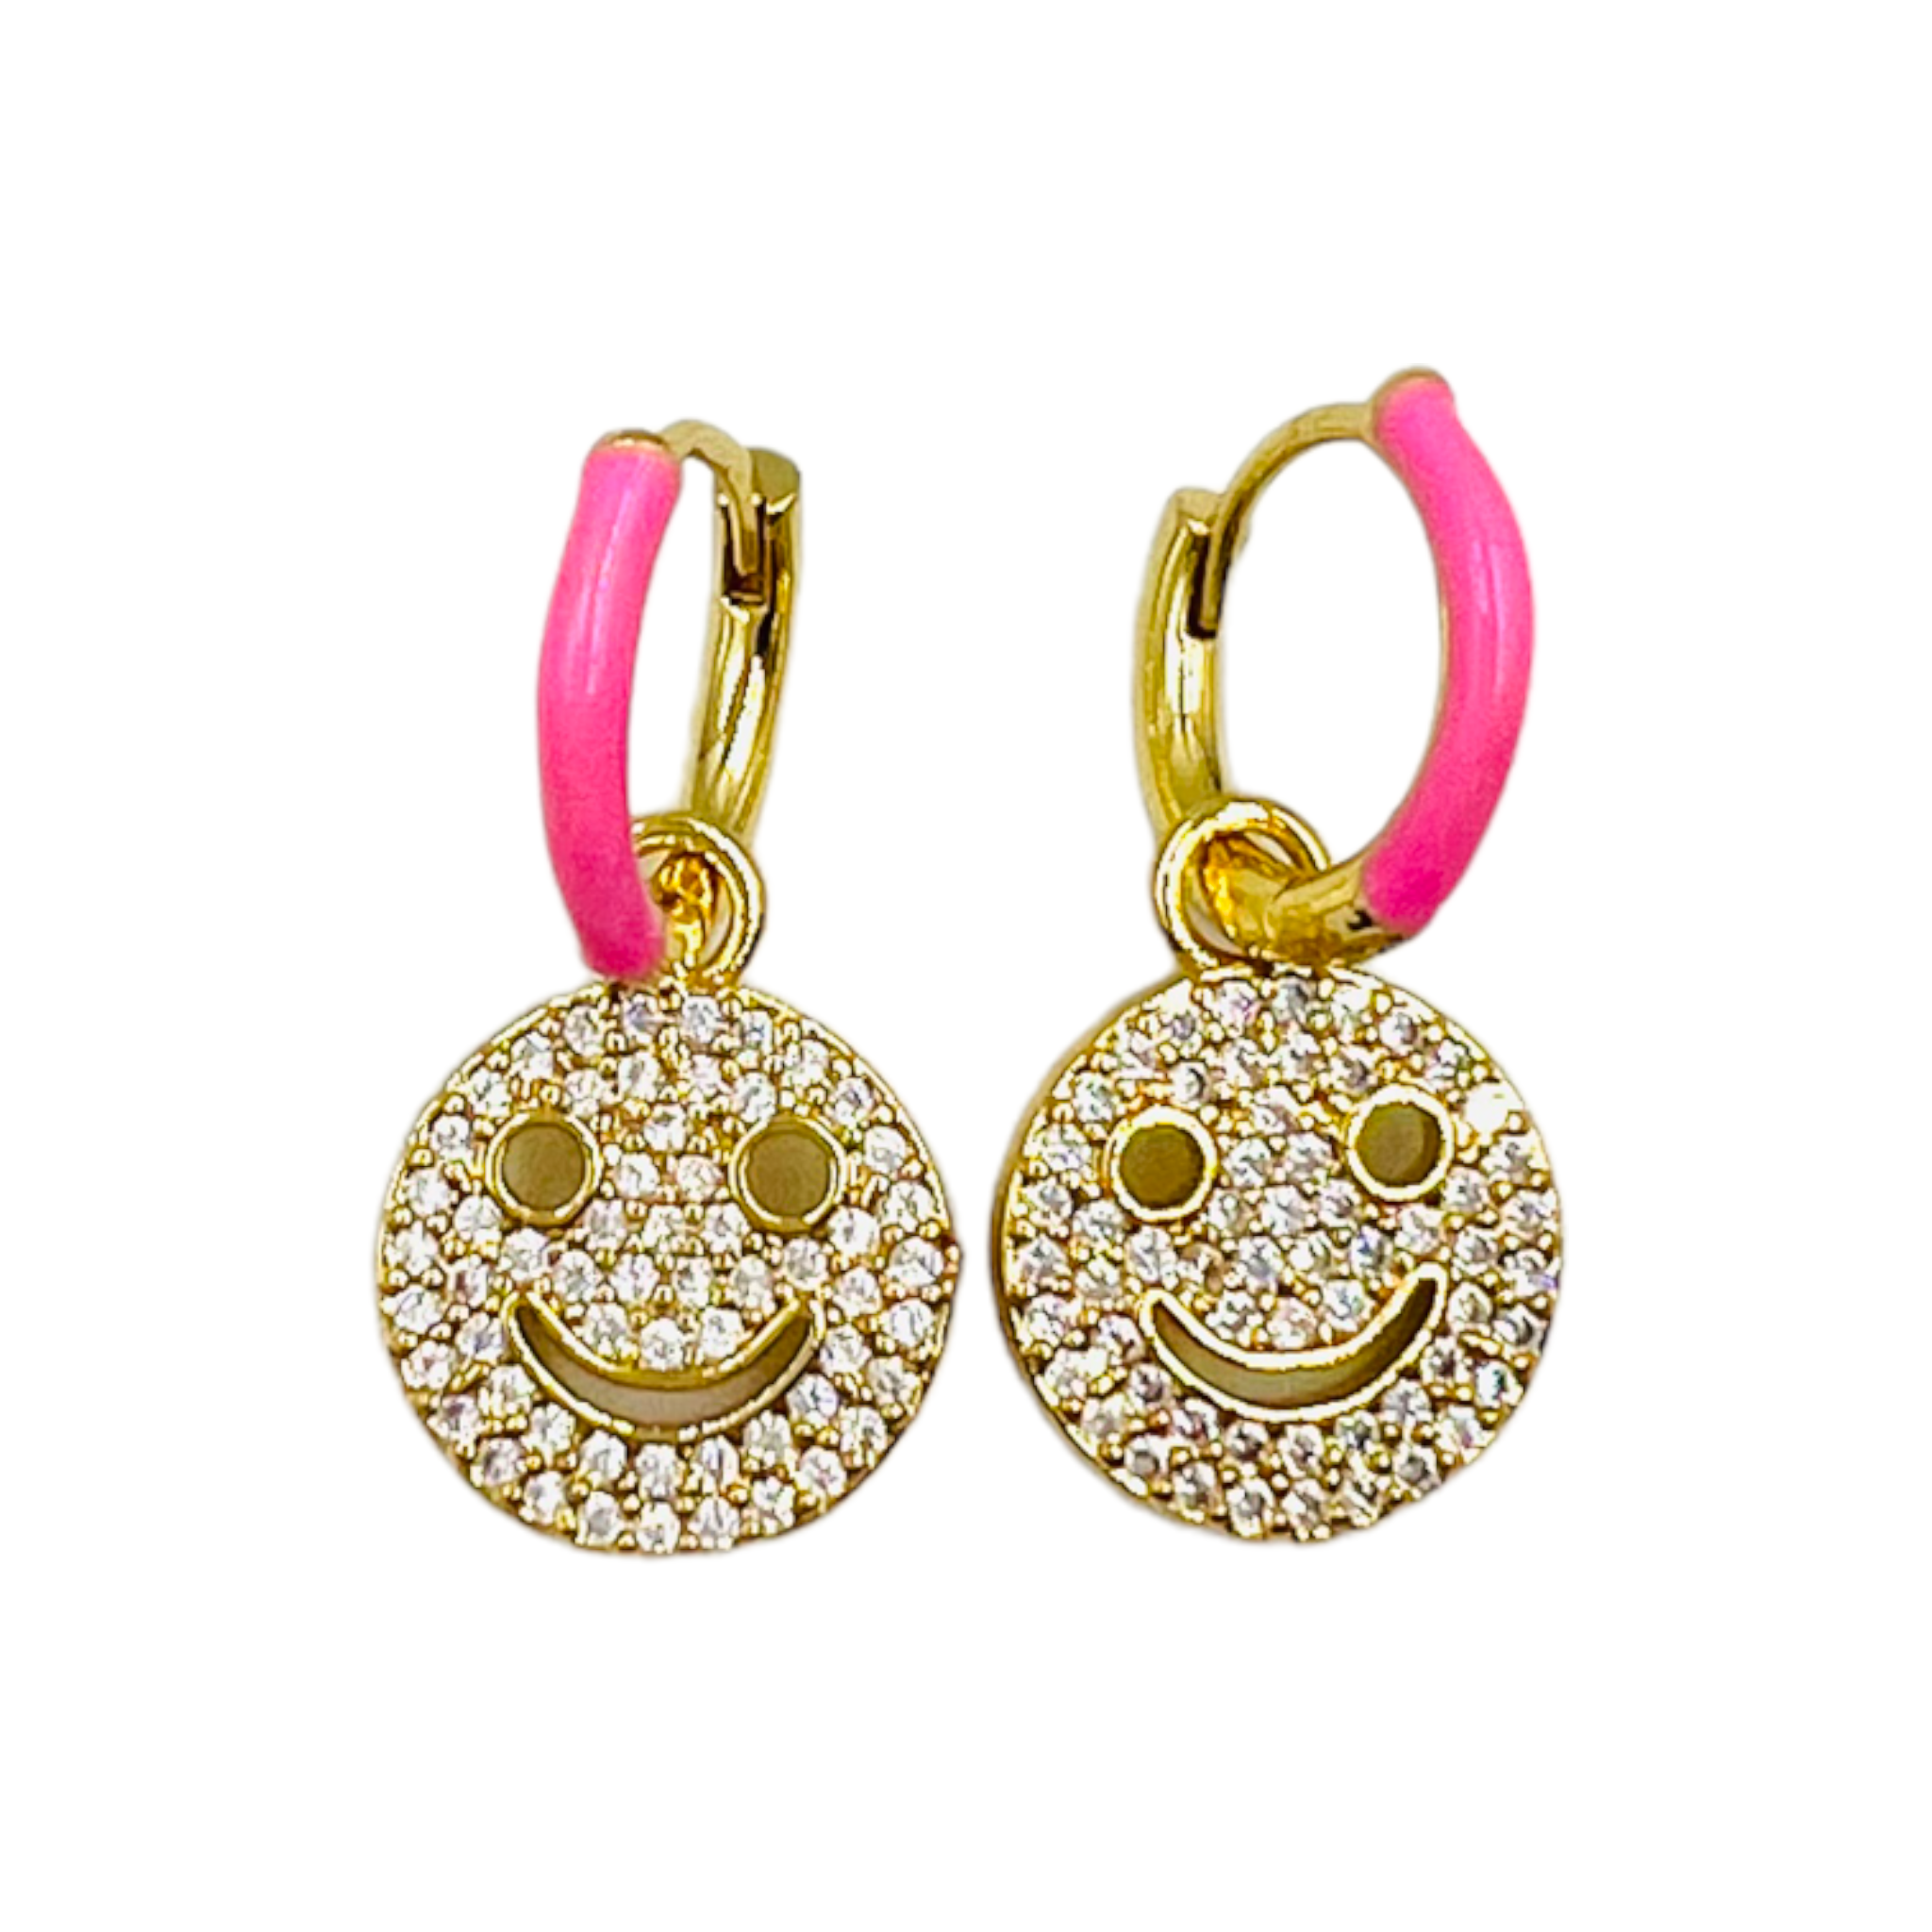 EARRINGS SMILEY STRASS - Available in 10 colors